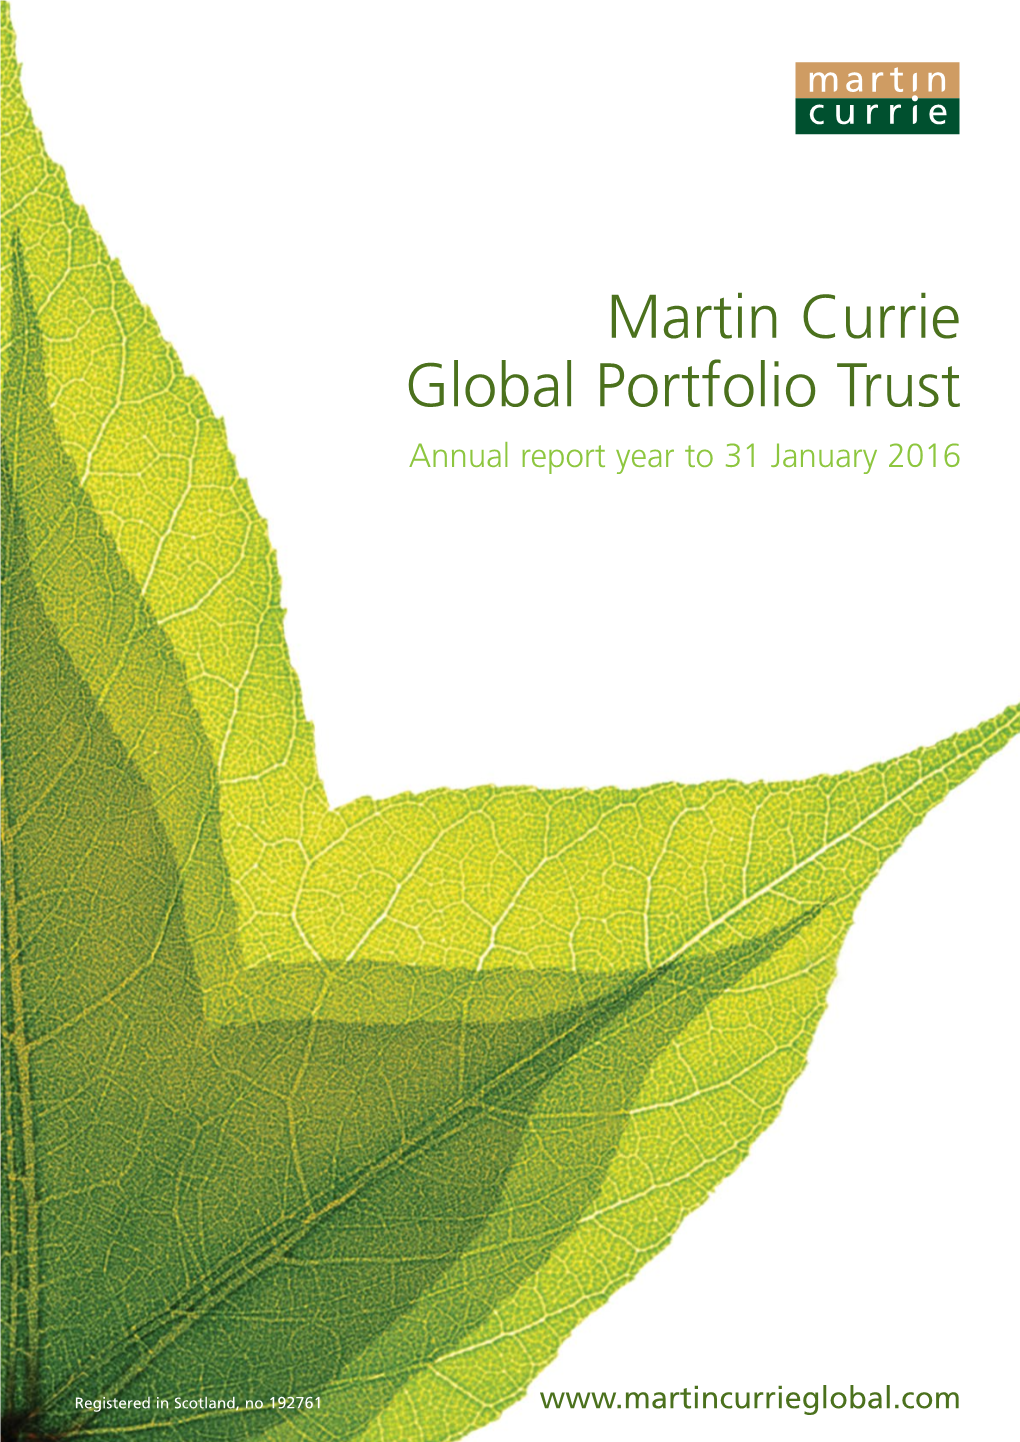 Martin Currie Global Portfolio Trust Annual Report Year to 31 January 2016